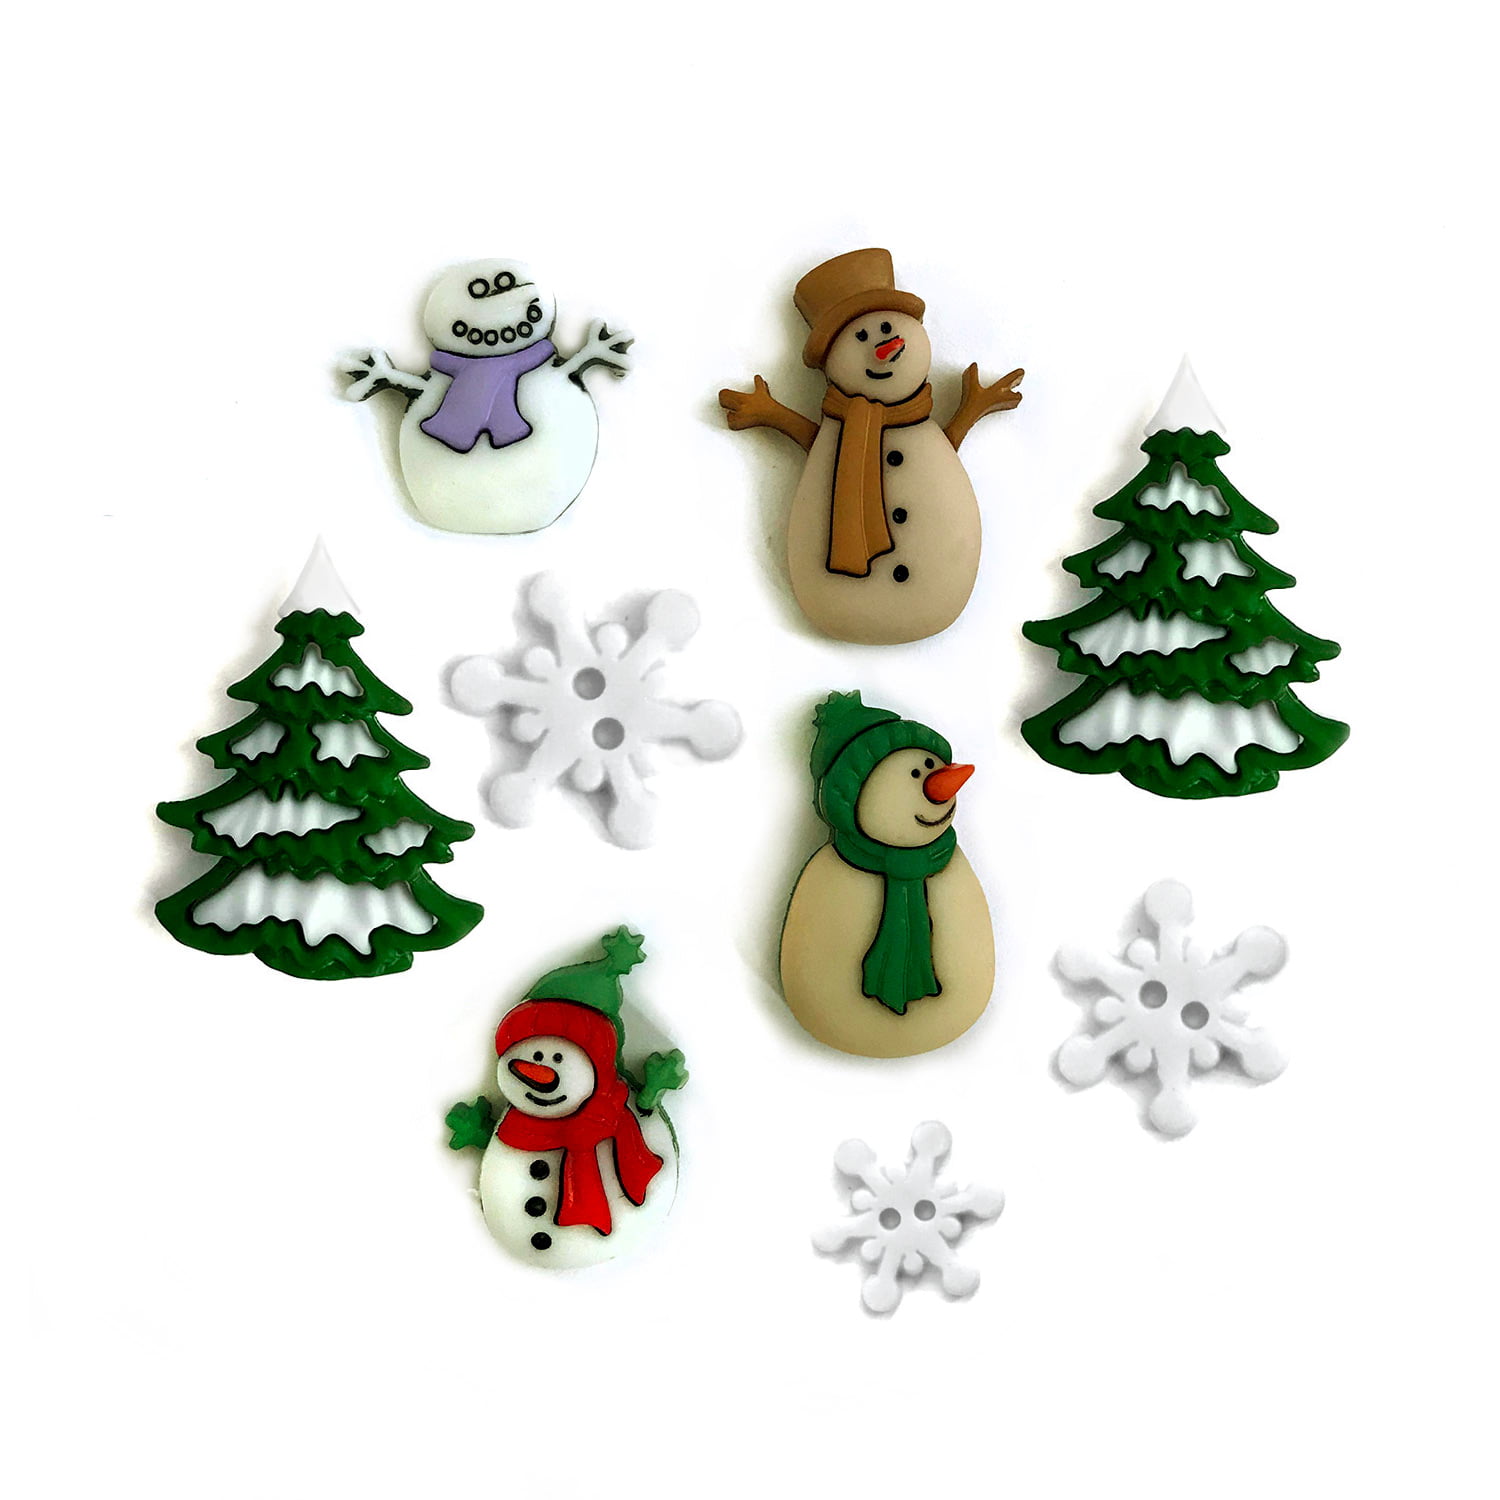 SALE 20 Unusual Bright Modern Wooden Christmas Tree Buttons 30 x 23mm FREE P&P 